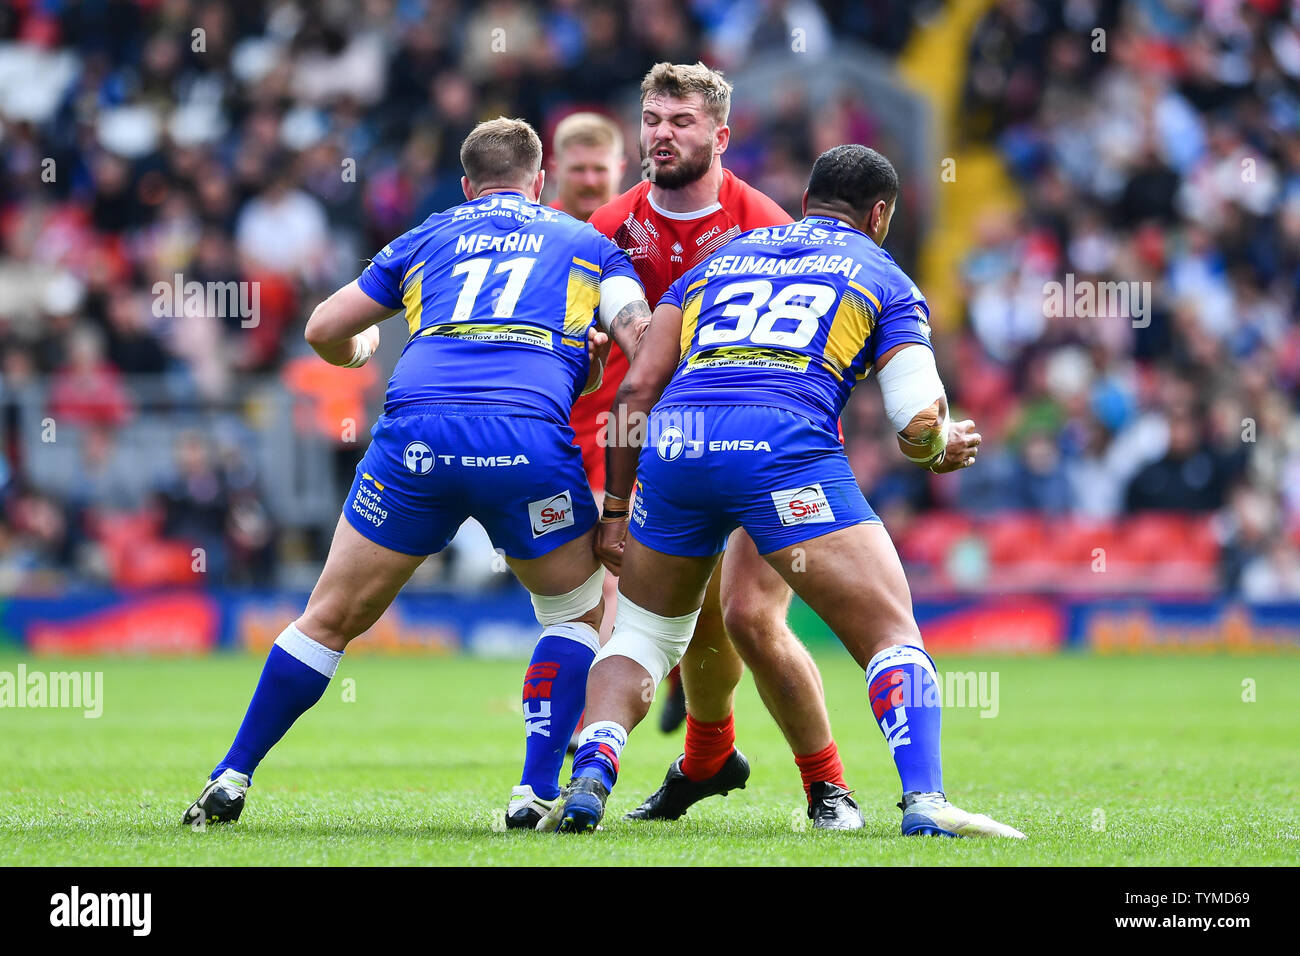 26th May 2019 , Anfield Stadium, Liverpool, England; Dacia Magic Weekend, Betfred Super League Round 16, Leeds Rhinos vs London Broncos ; Robert Butler (23) of London Broncos is tackled by Avagala Seumanufagai (38) and Trent Merrin (11) of Leeds Rhinos  Credit: Craig Thomas/News Images Stock Photo